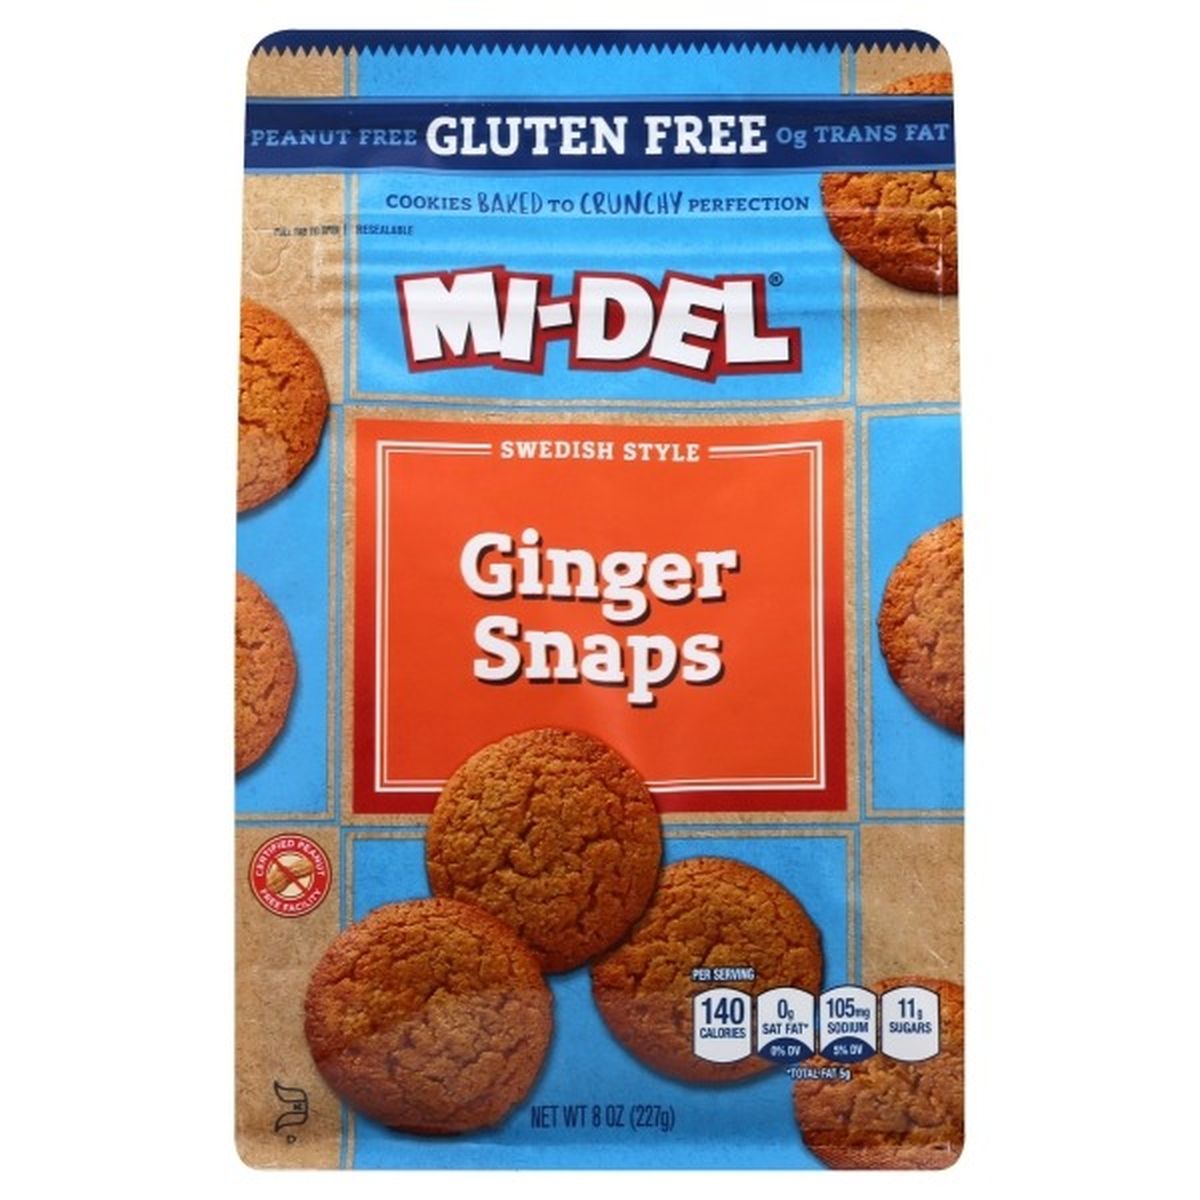 Calories in Mi del Ginger Snaps, Gluten Free, Swedish Style